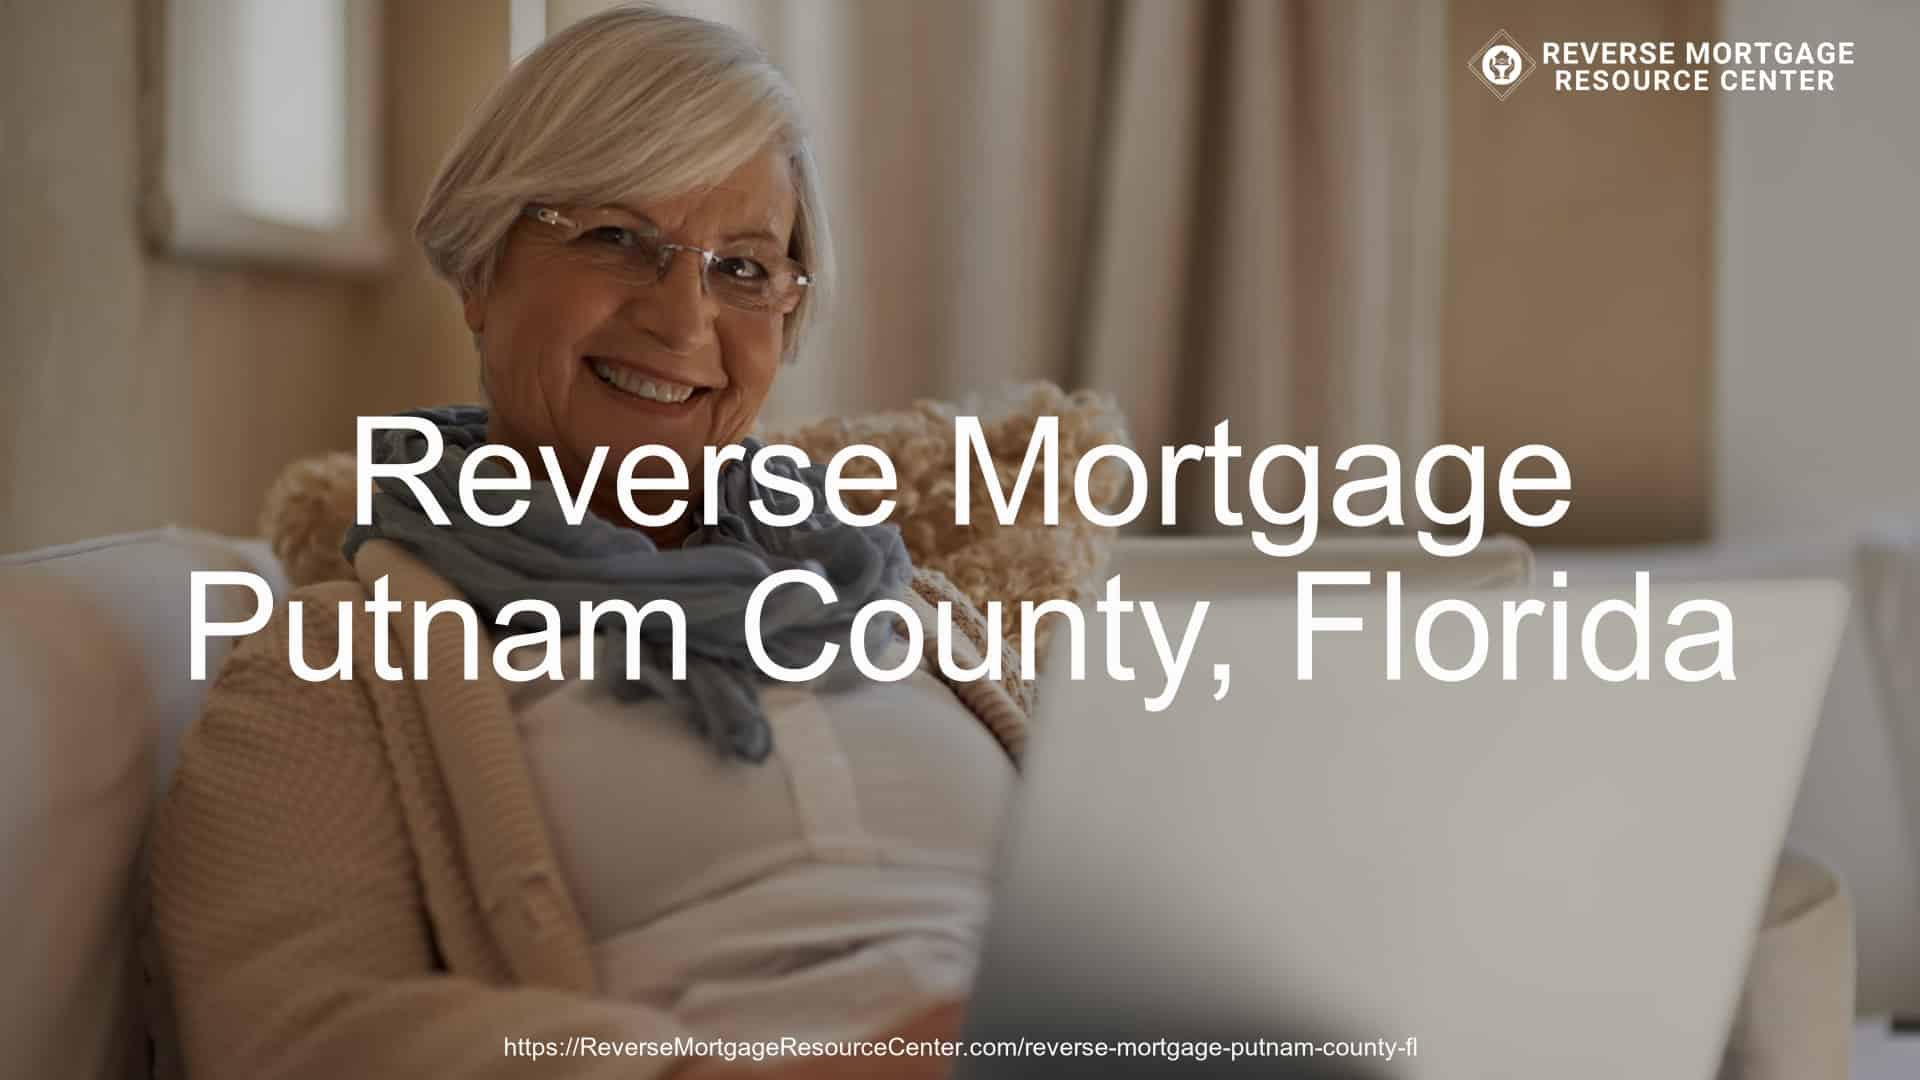 Reverse Mortgage Loans in Putnam County Florida